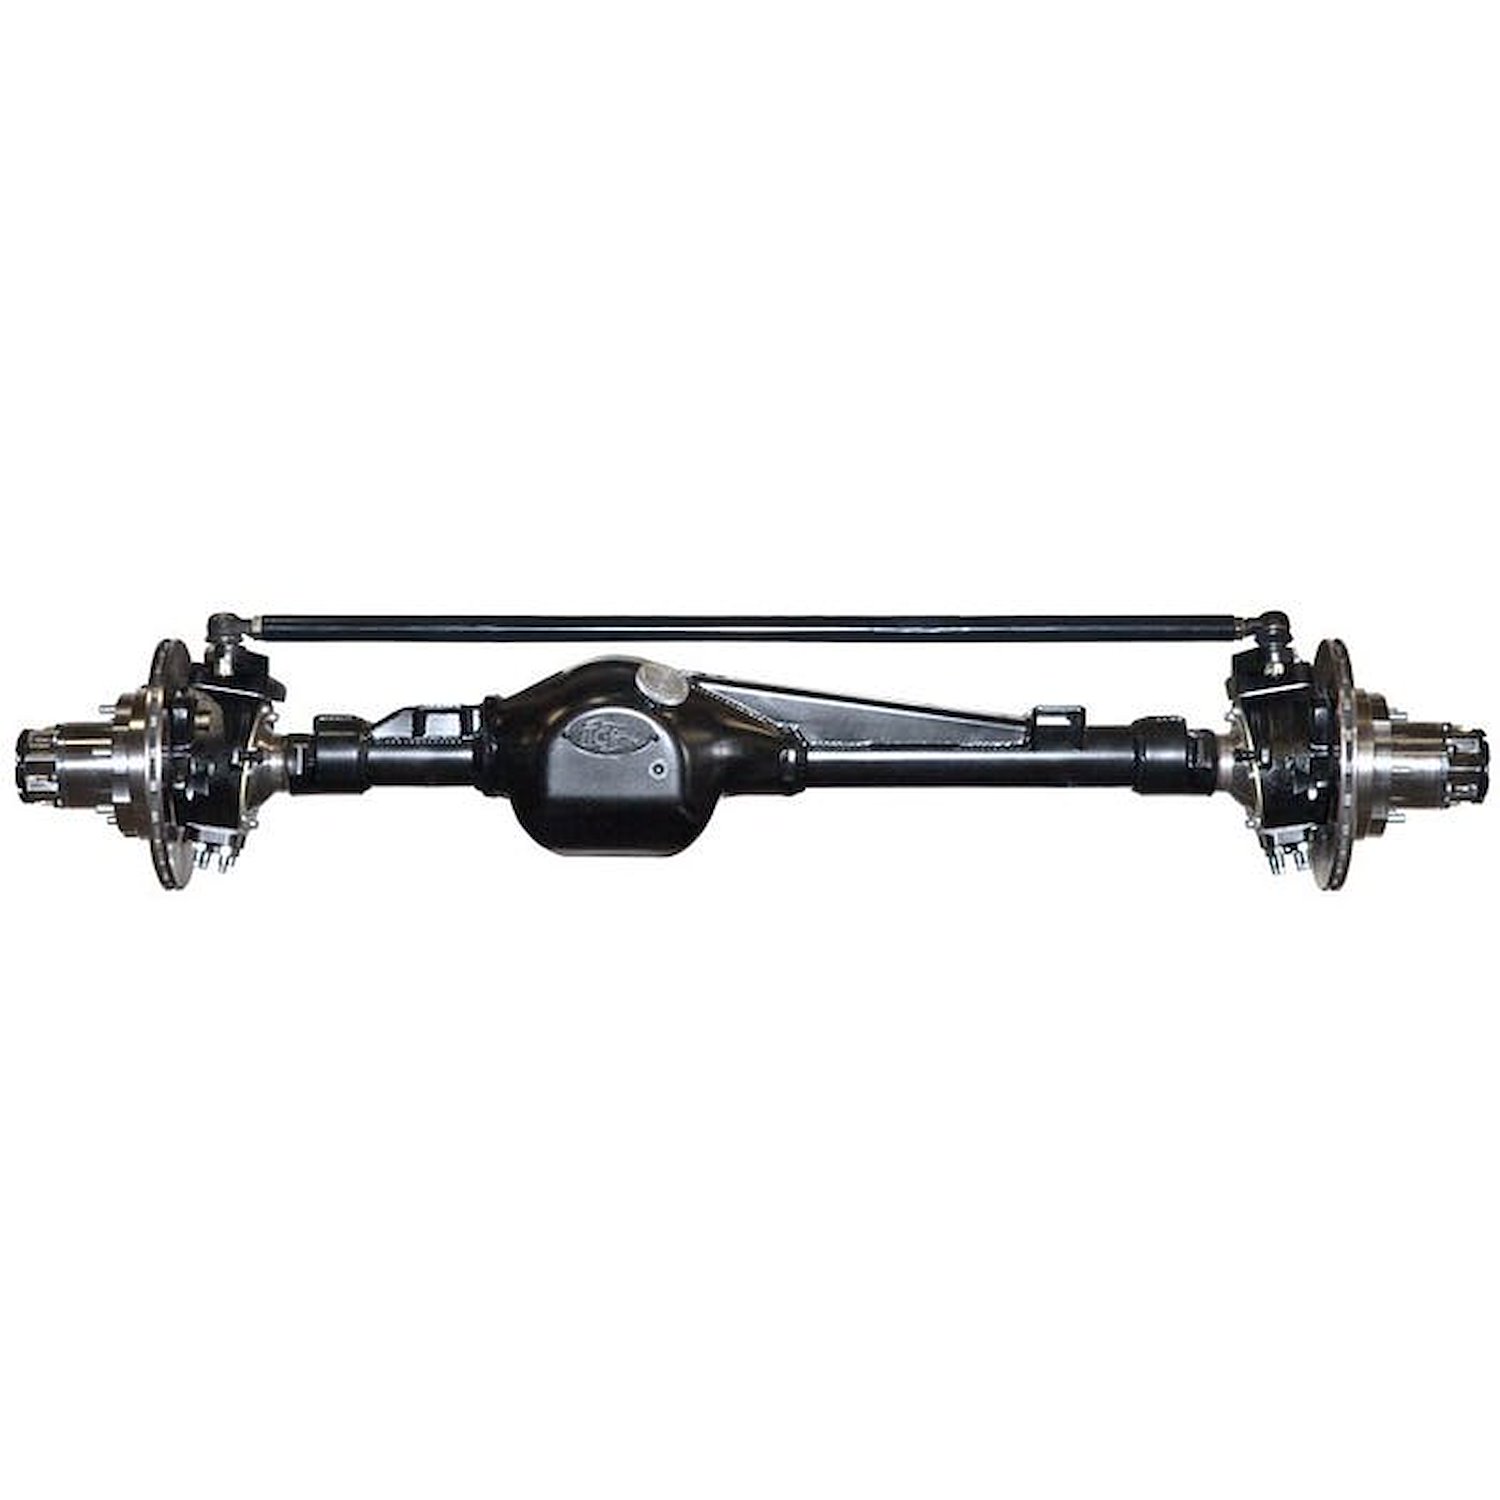 301651-1-KIT Rock Assault Fully-Built Front Axles, +5 Width, LHD, V6, 5.29, Grizzly, Locking Hubs, Toyota